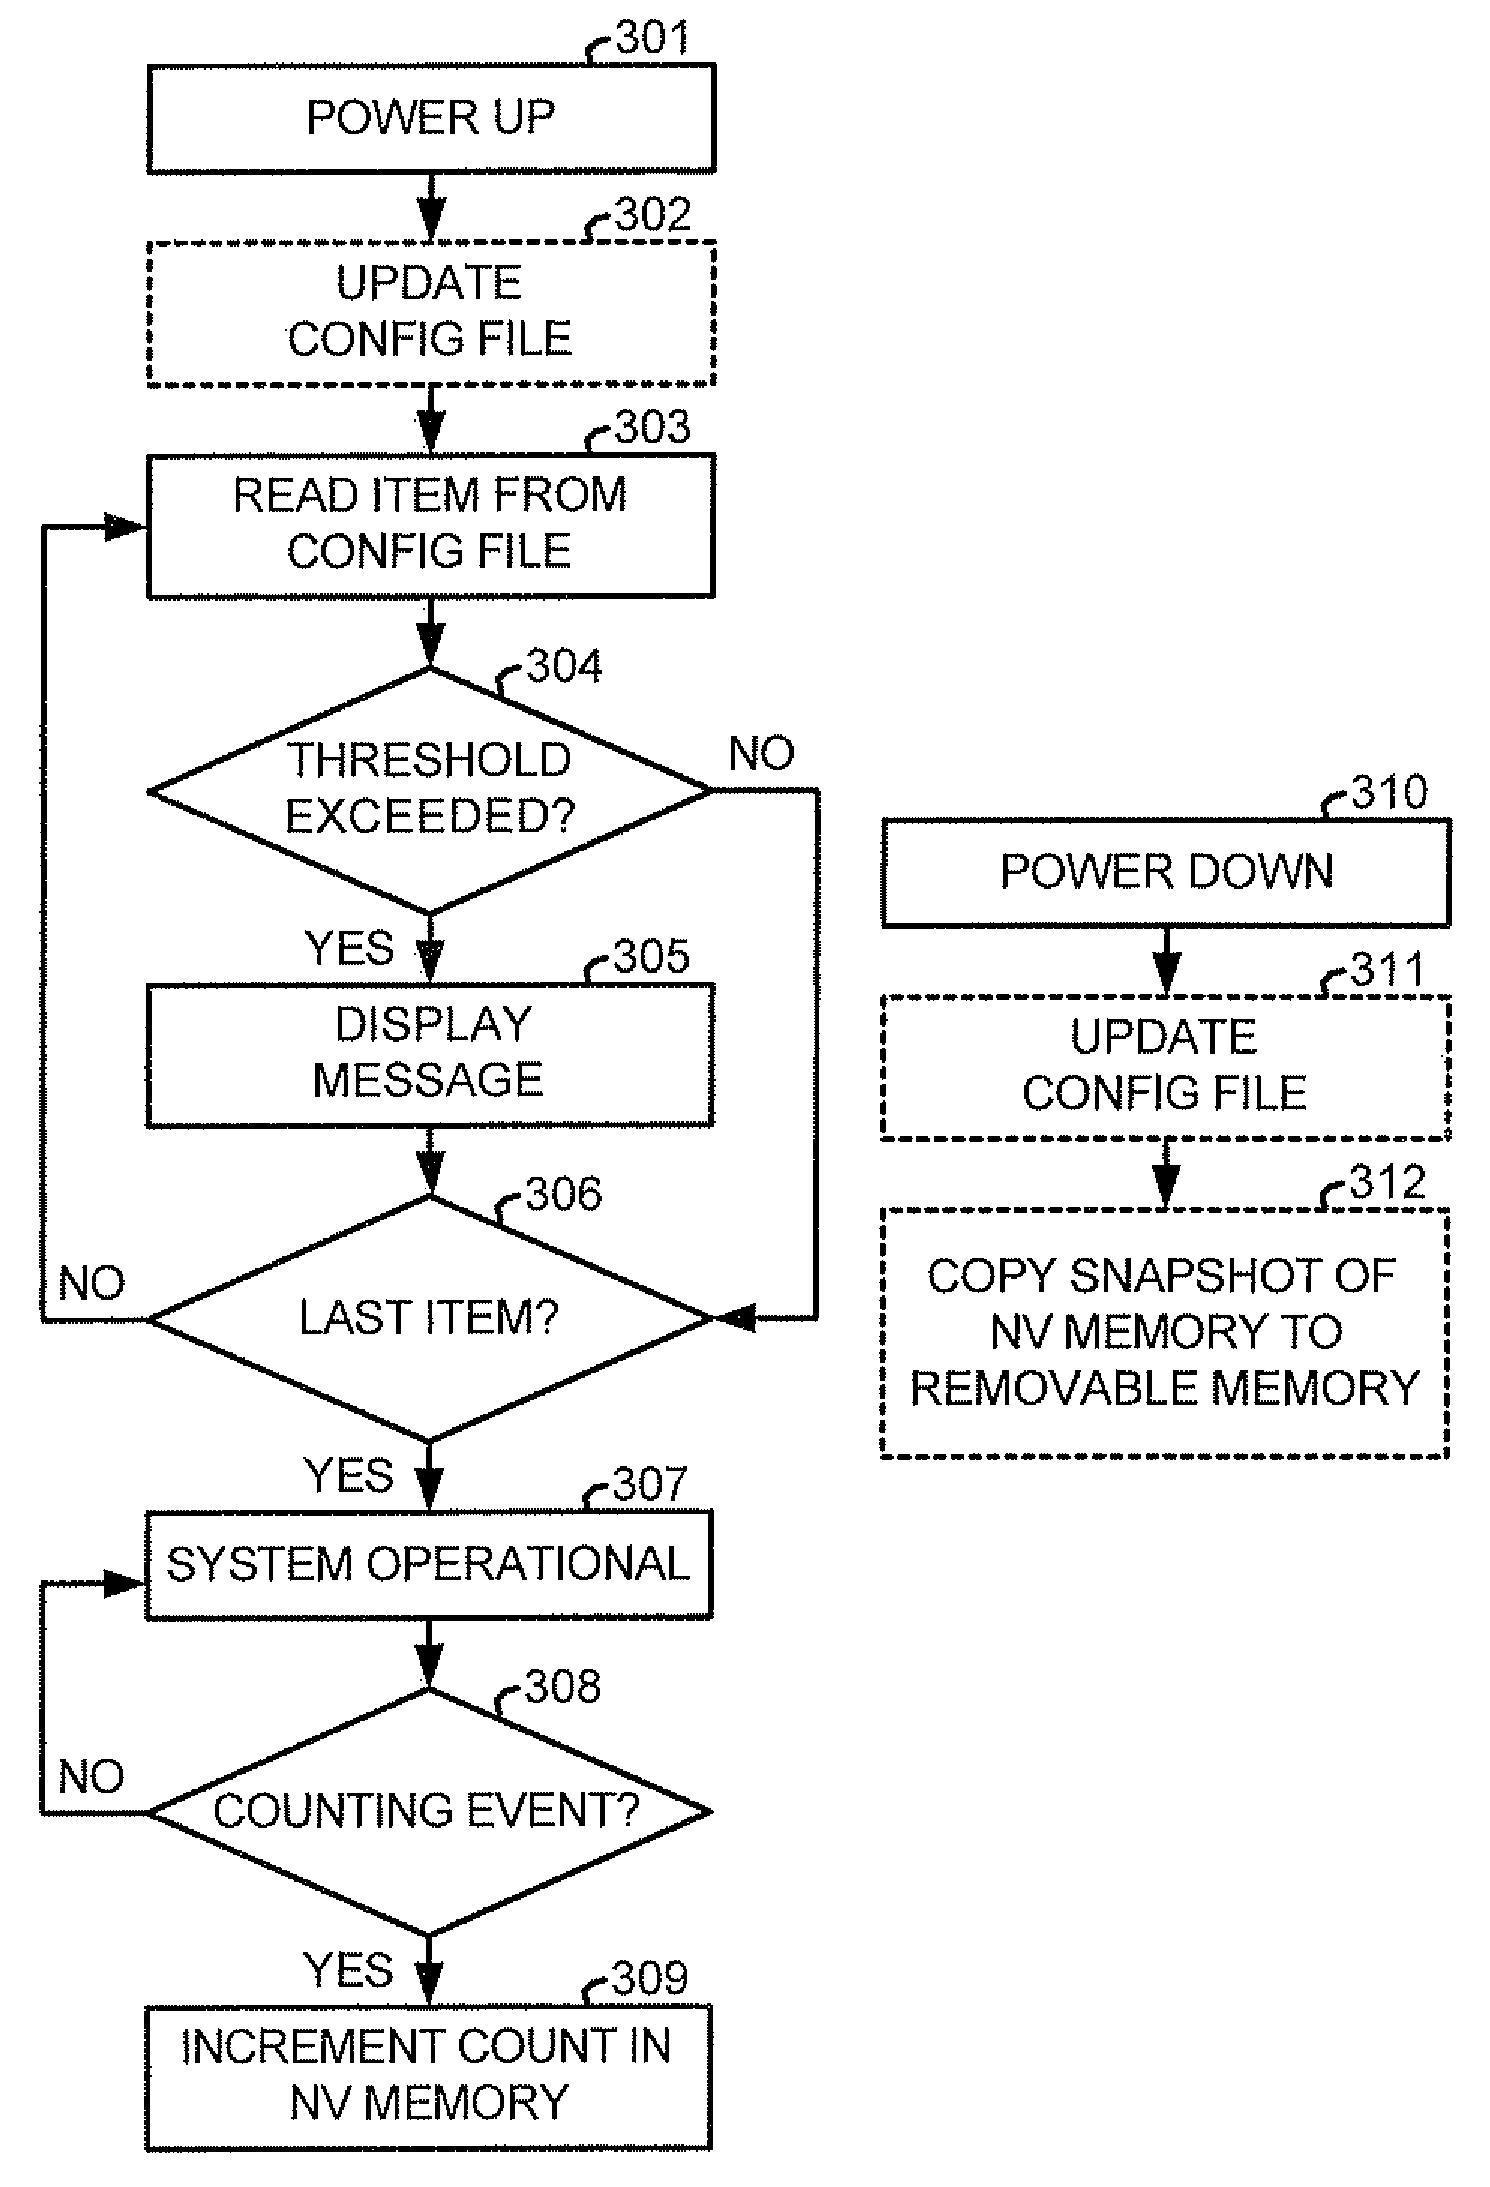 Method for tracking and reporting usage events to determine when preventive maintenance is due for a medical robotic system